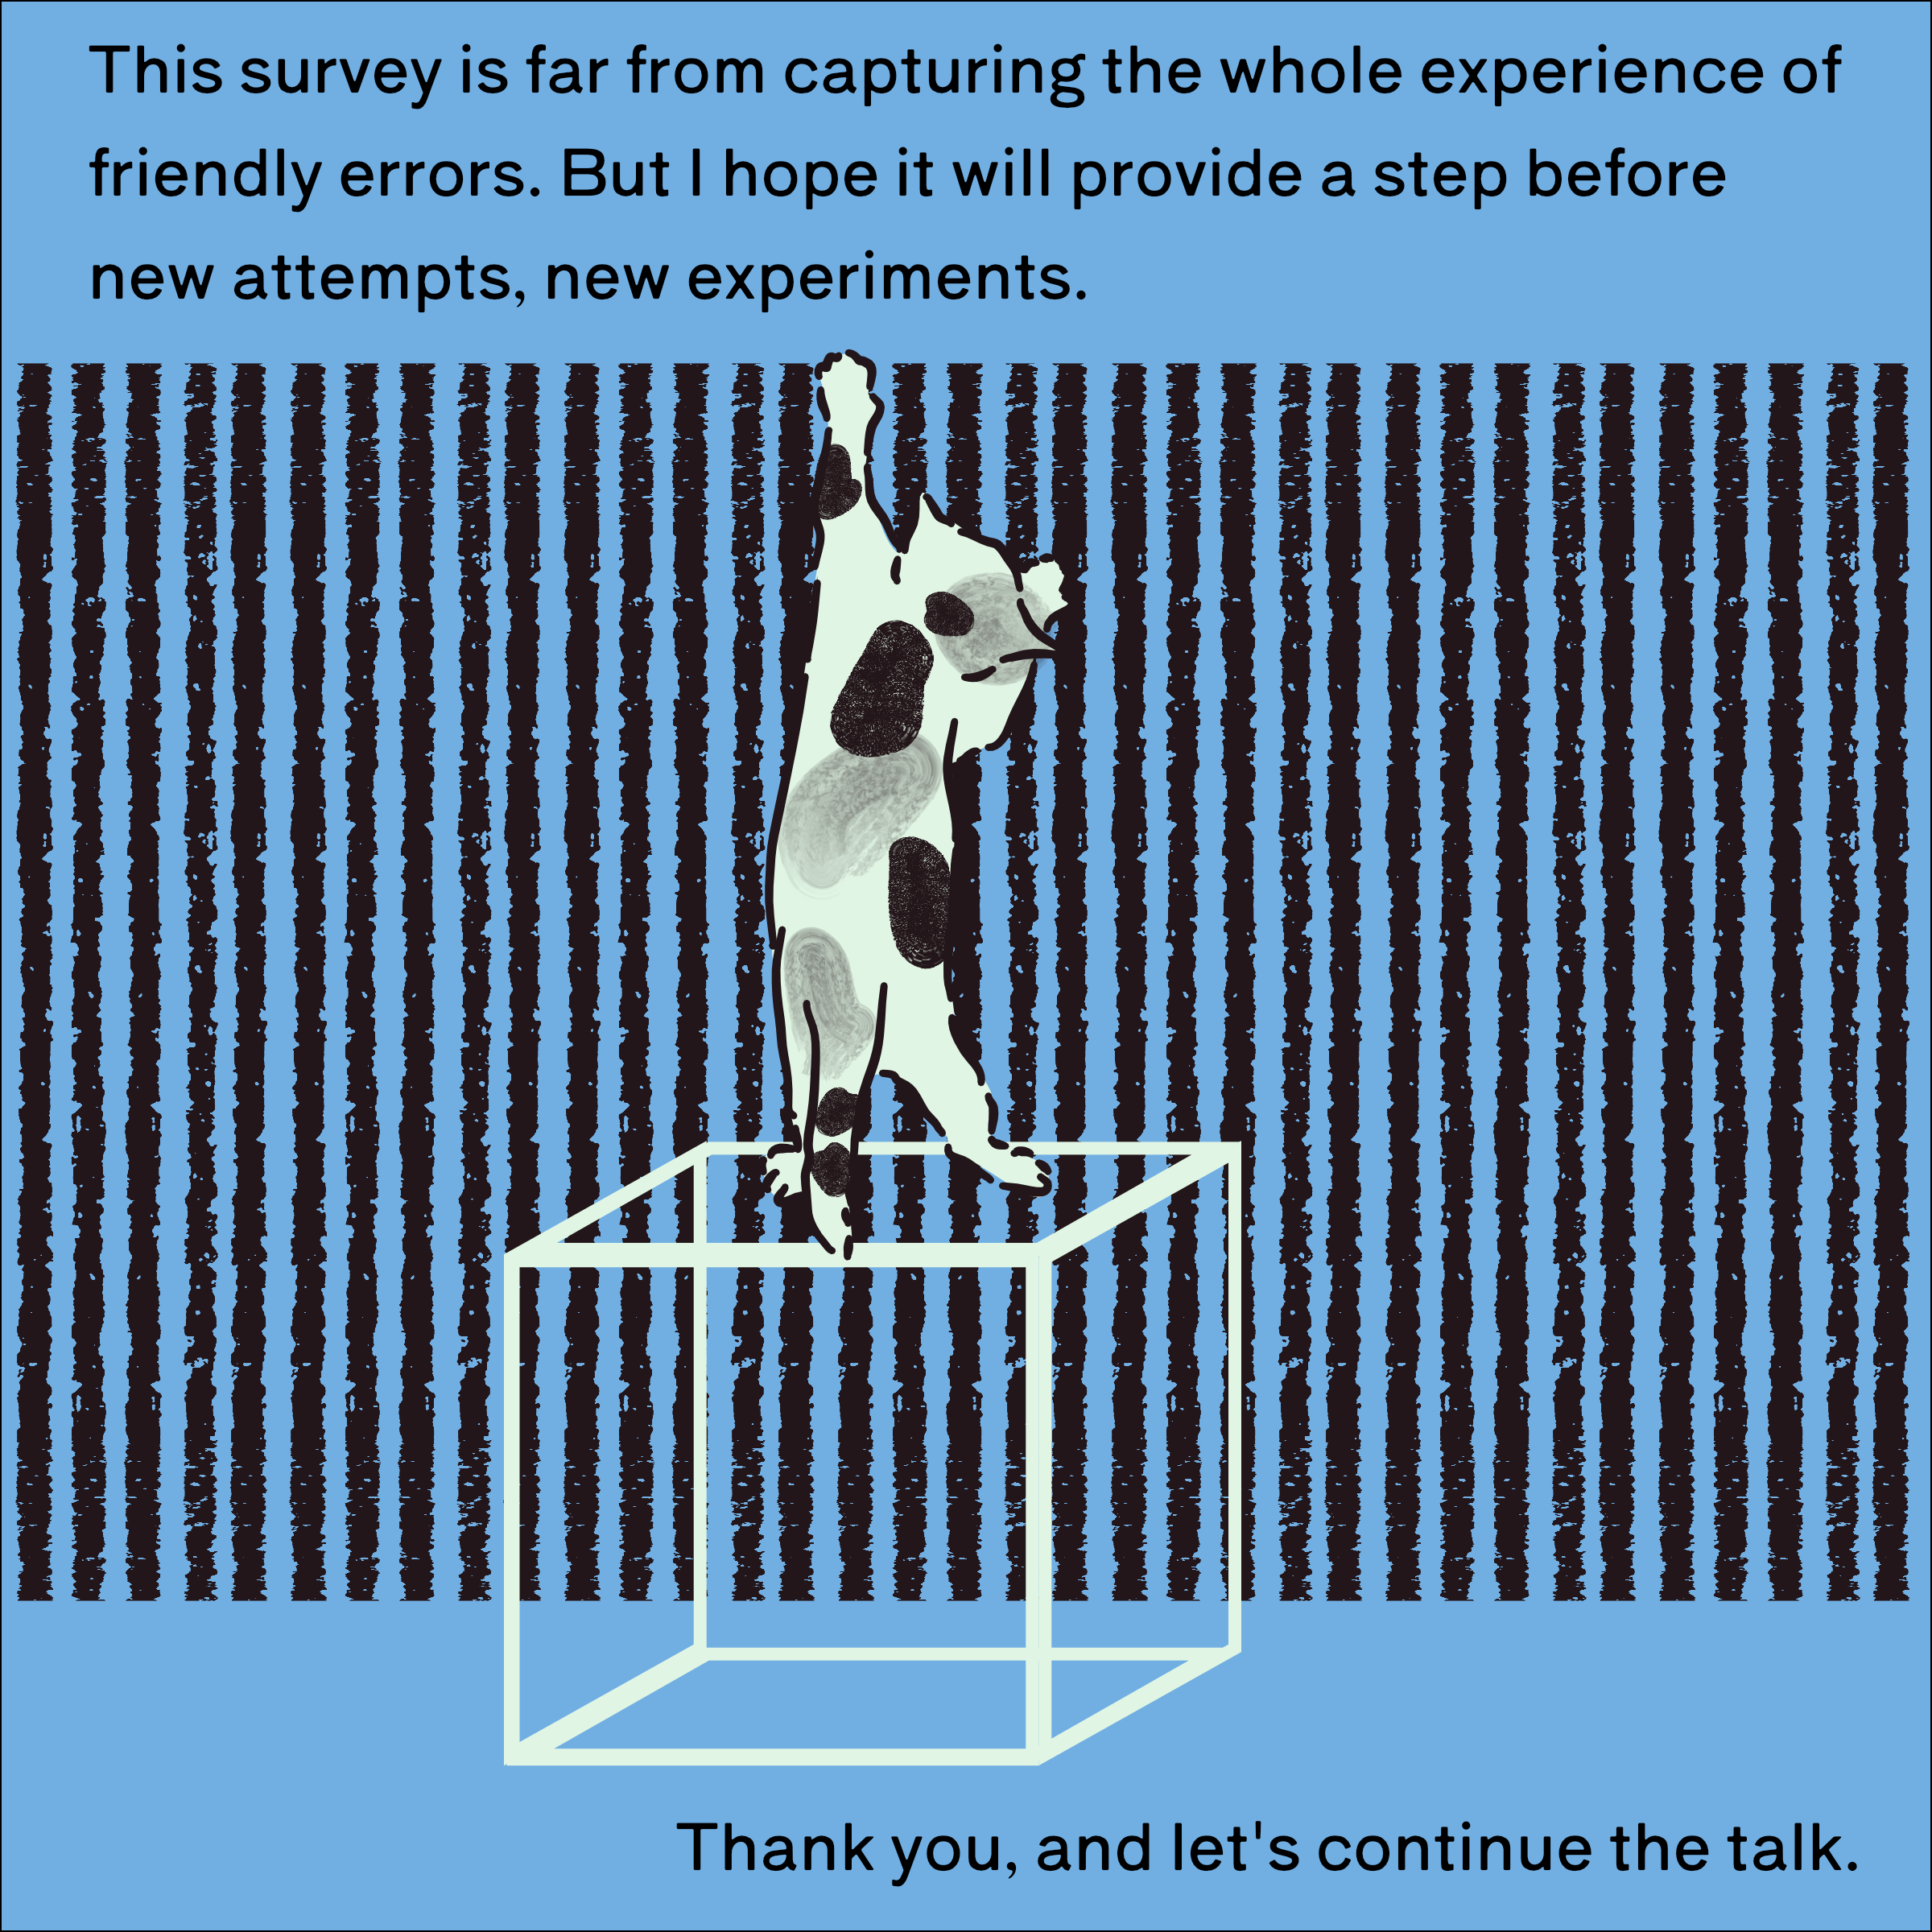 This survey is far from capturing the whole experience of friendly errors. But I hope it will provide a step before new attempts, new experiments. Thank you, and let's continue the talk.